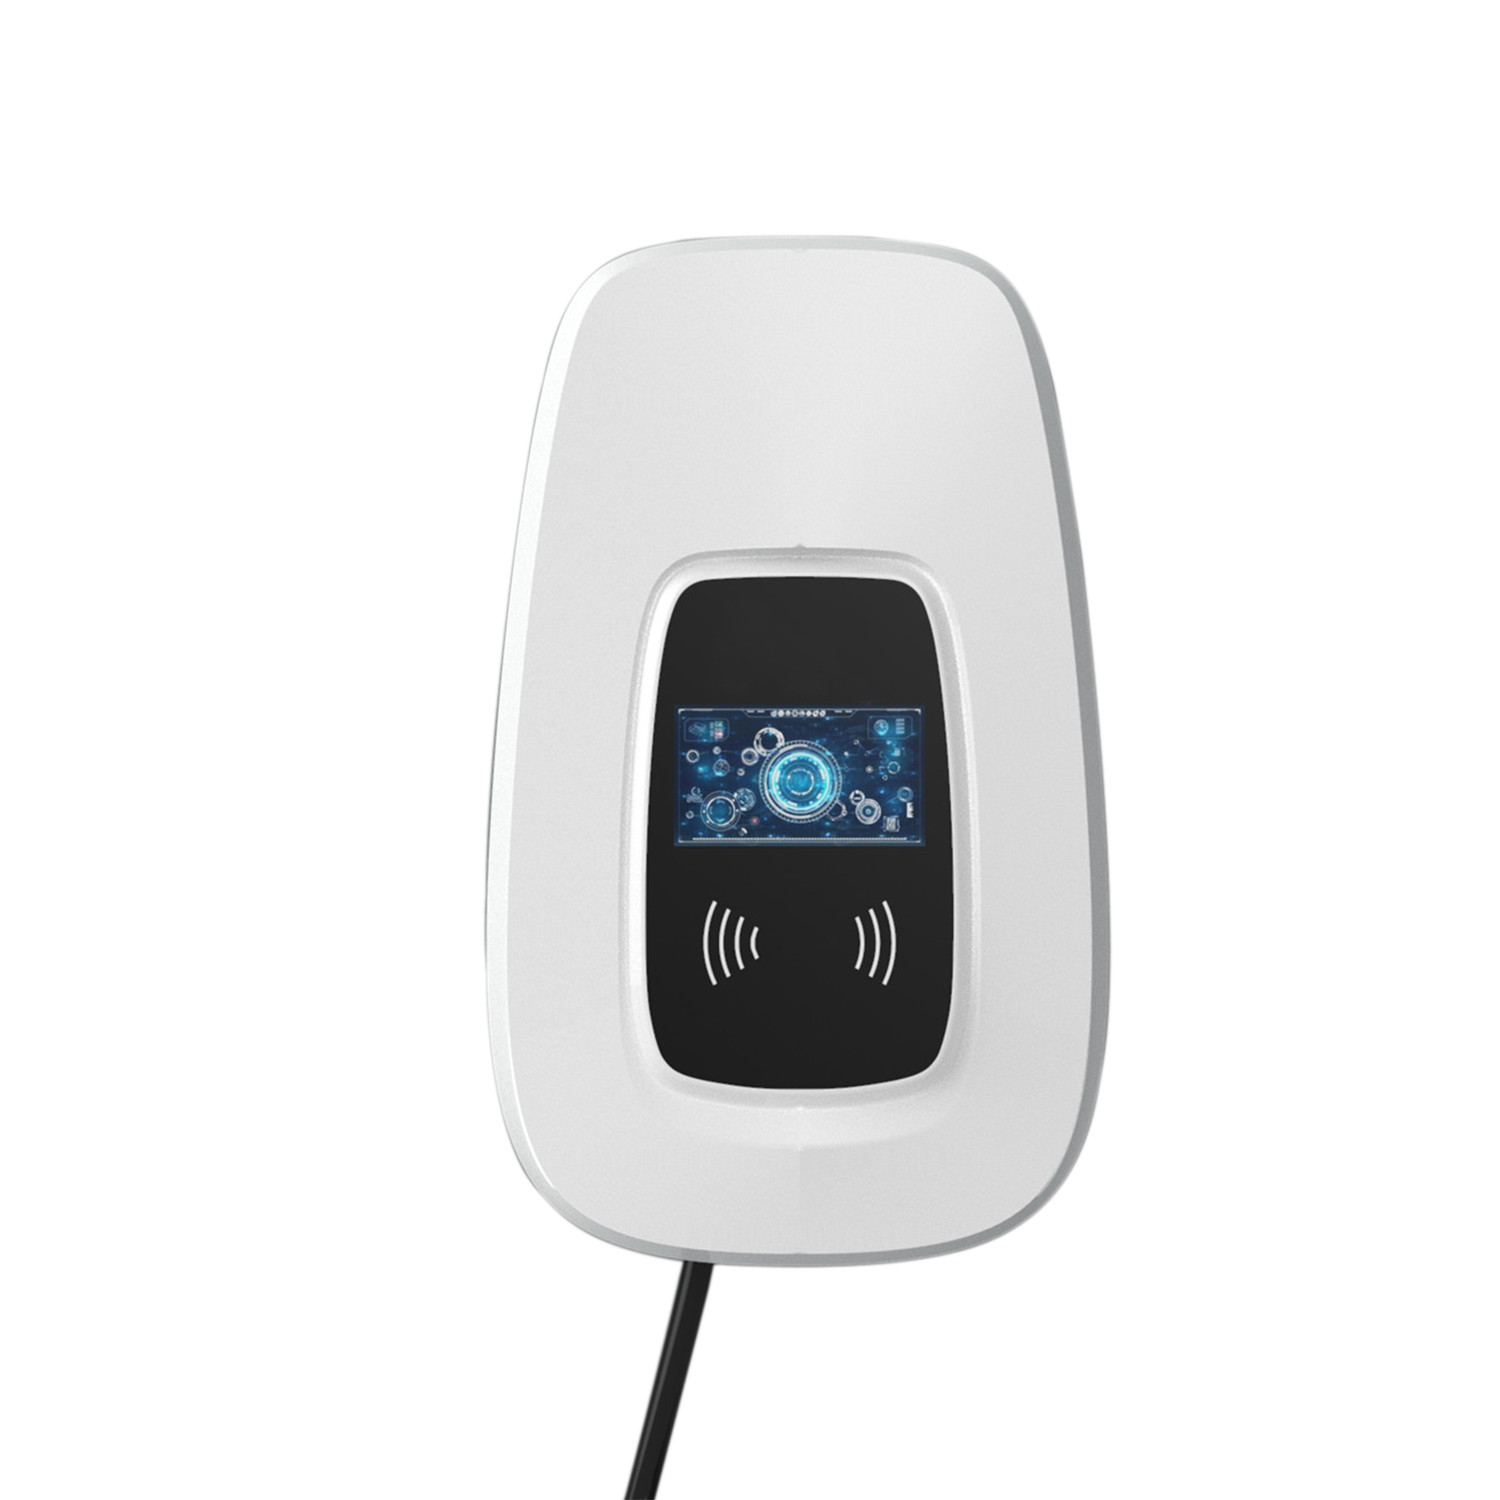 Single phase fast electric vehicle charging stations 7.4KW AC wallbox charger Featured Image